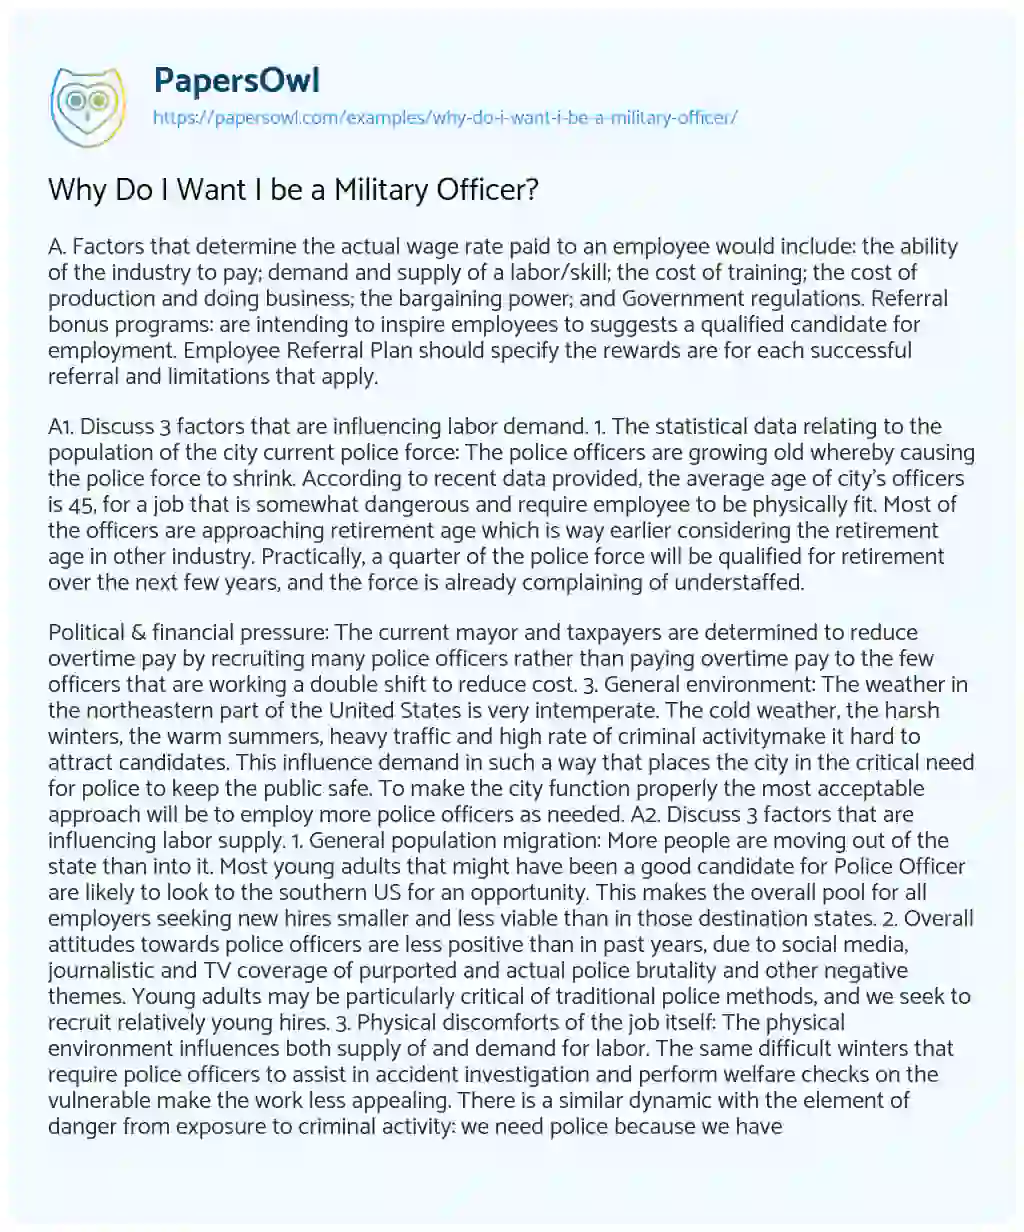 Essay on Why do i Want i be a Military Officer?